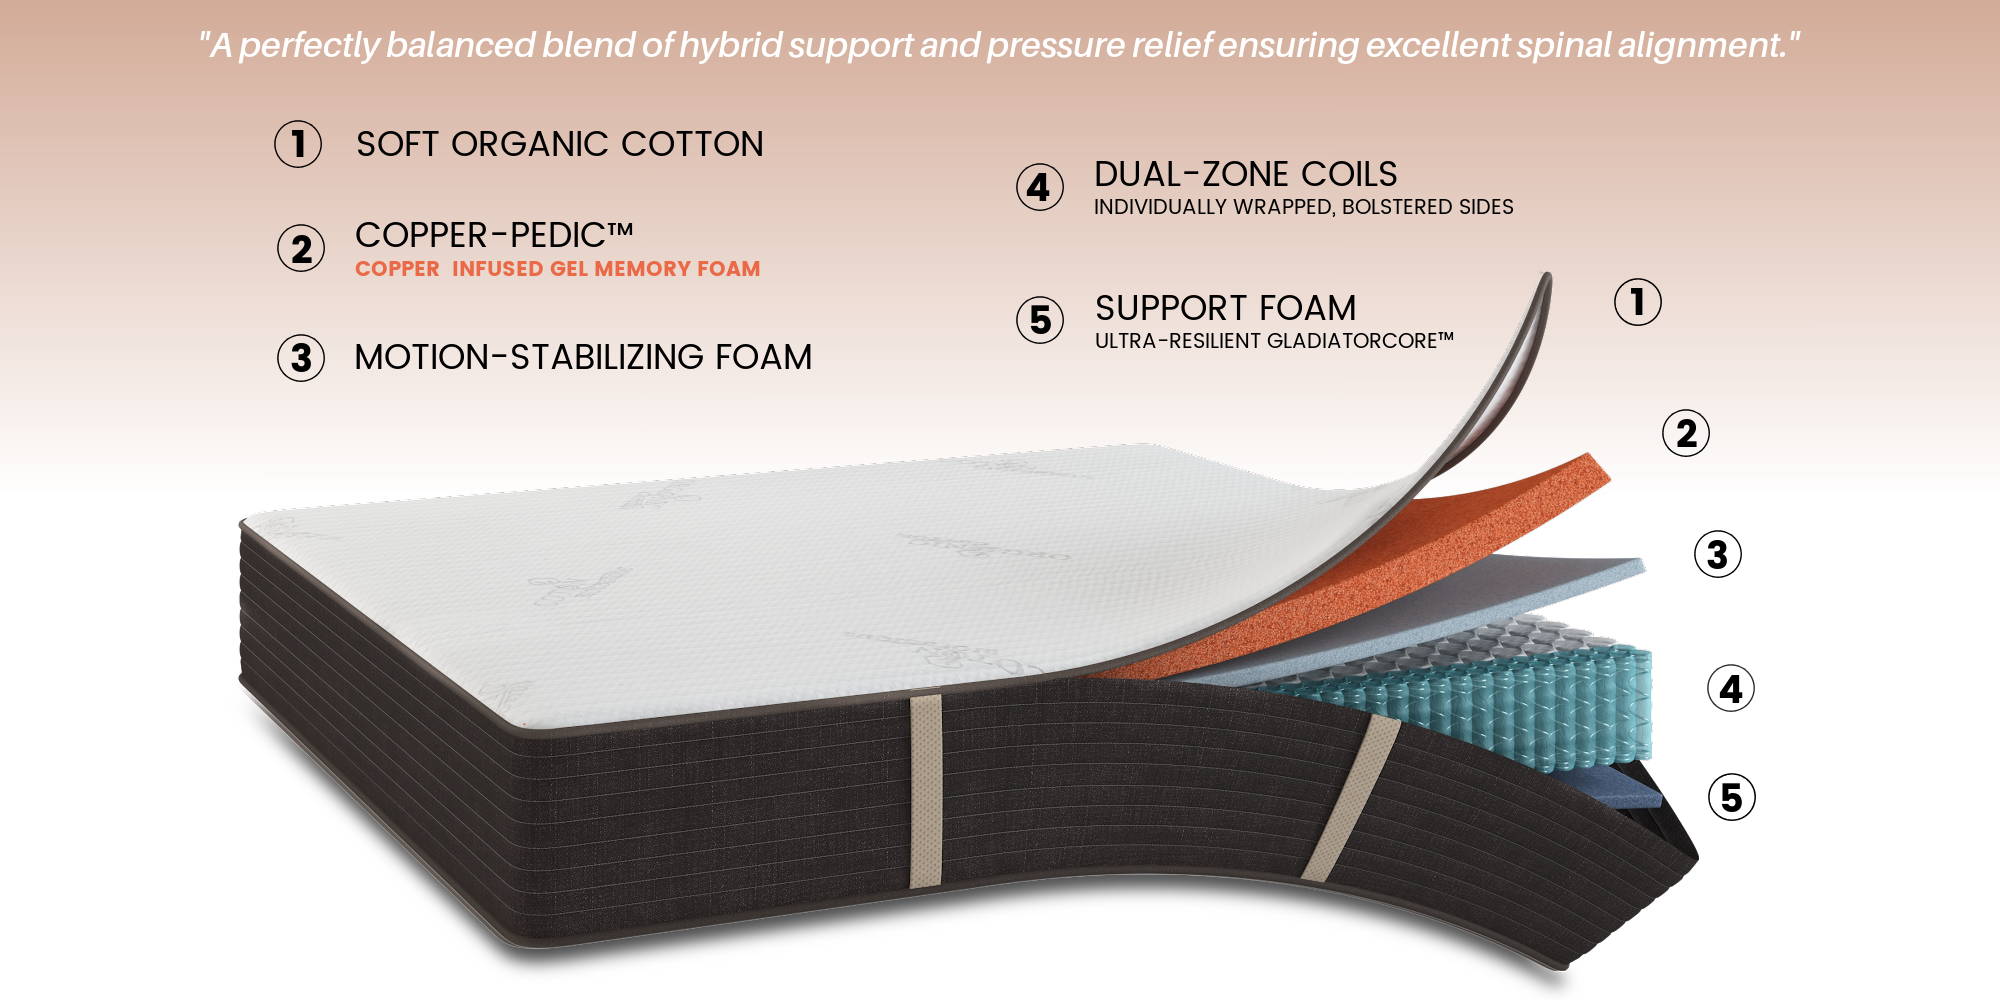 Open hybrid mattress with layers showing: soft organic cotton fabric, copper-infused cooling memory foam, motion stabilizing foam, dual-zone coils with bolstered sides, support foam made from plant-based GladiatorCore foam.